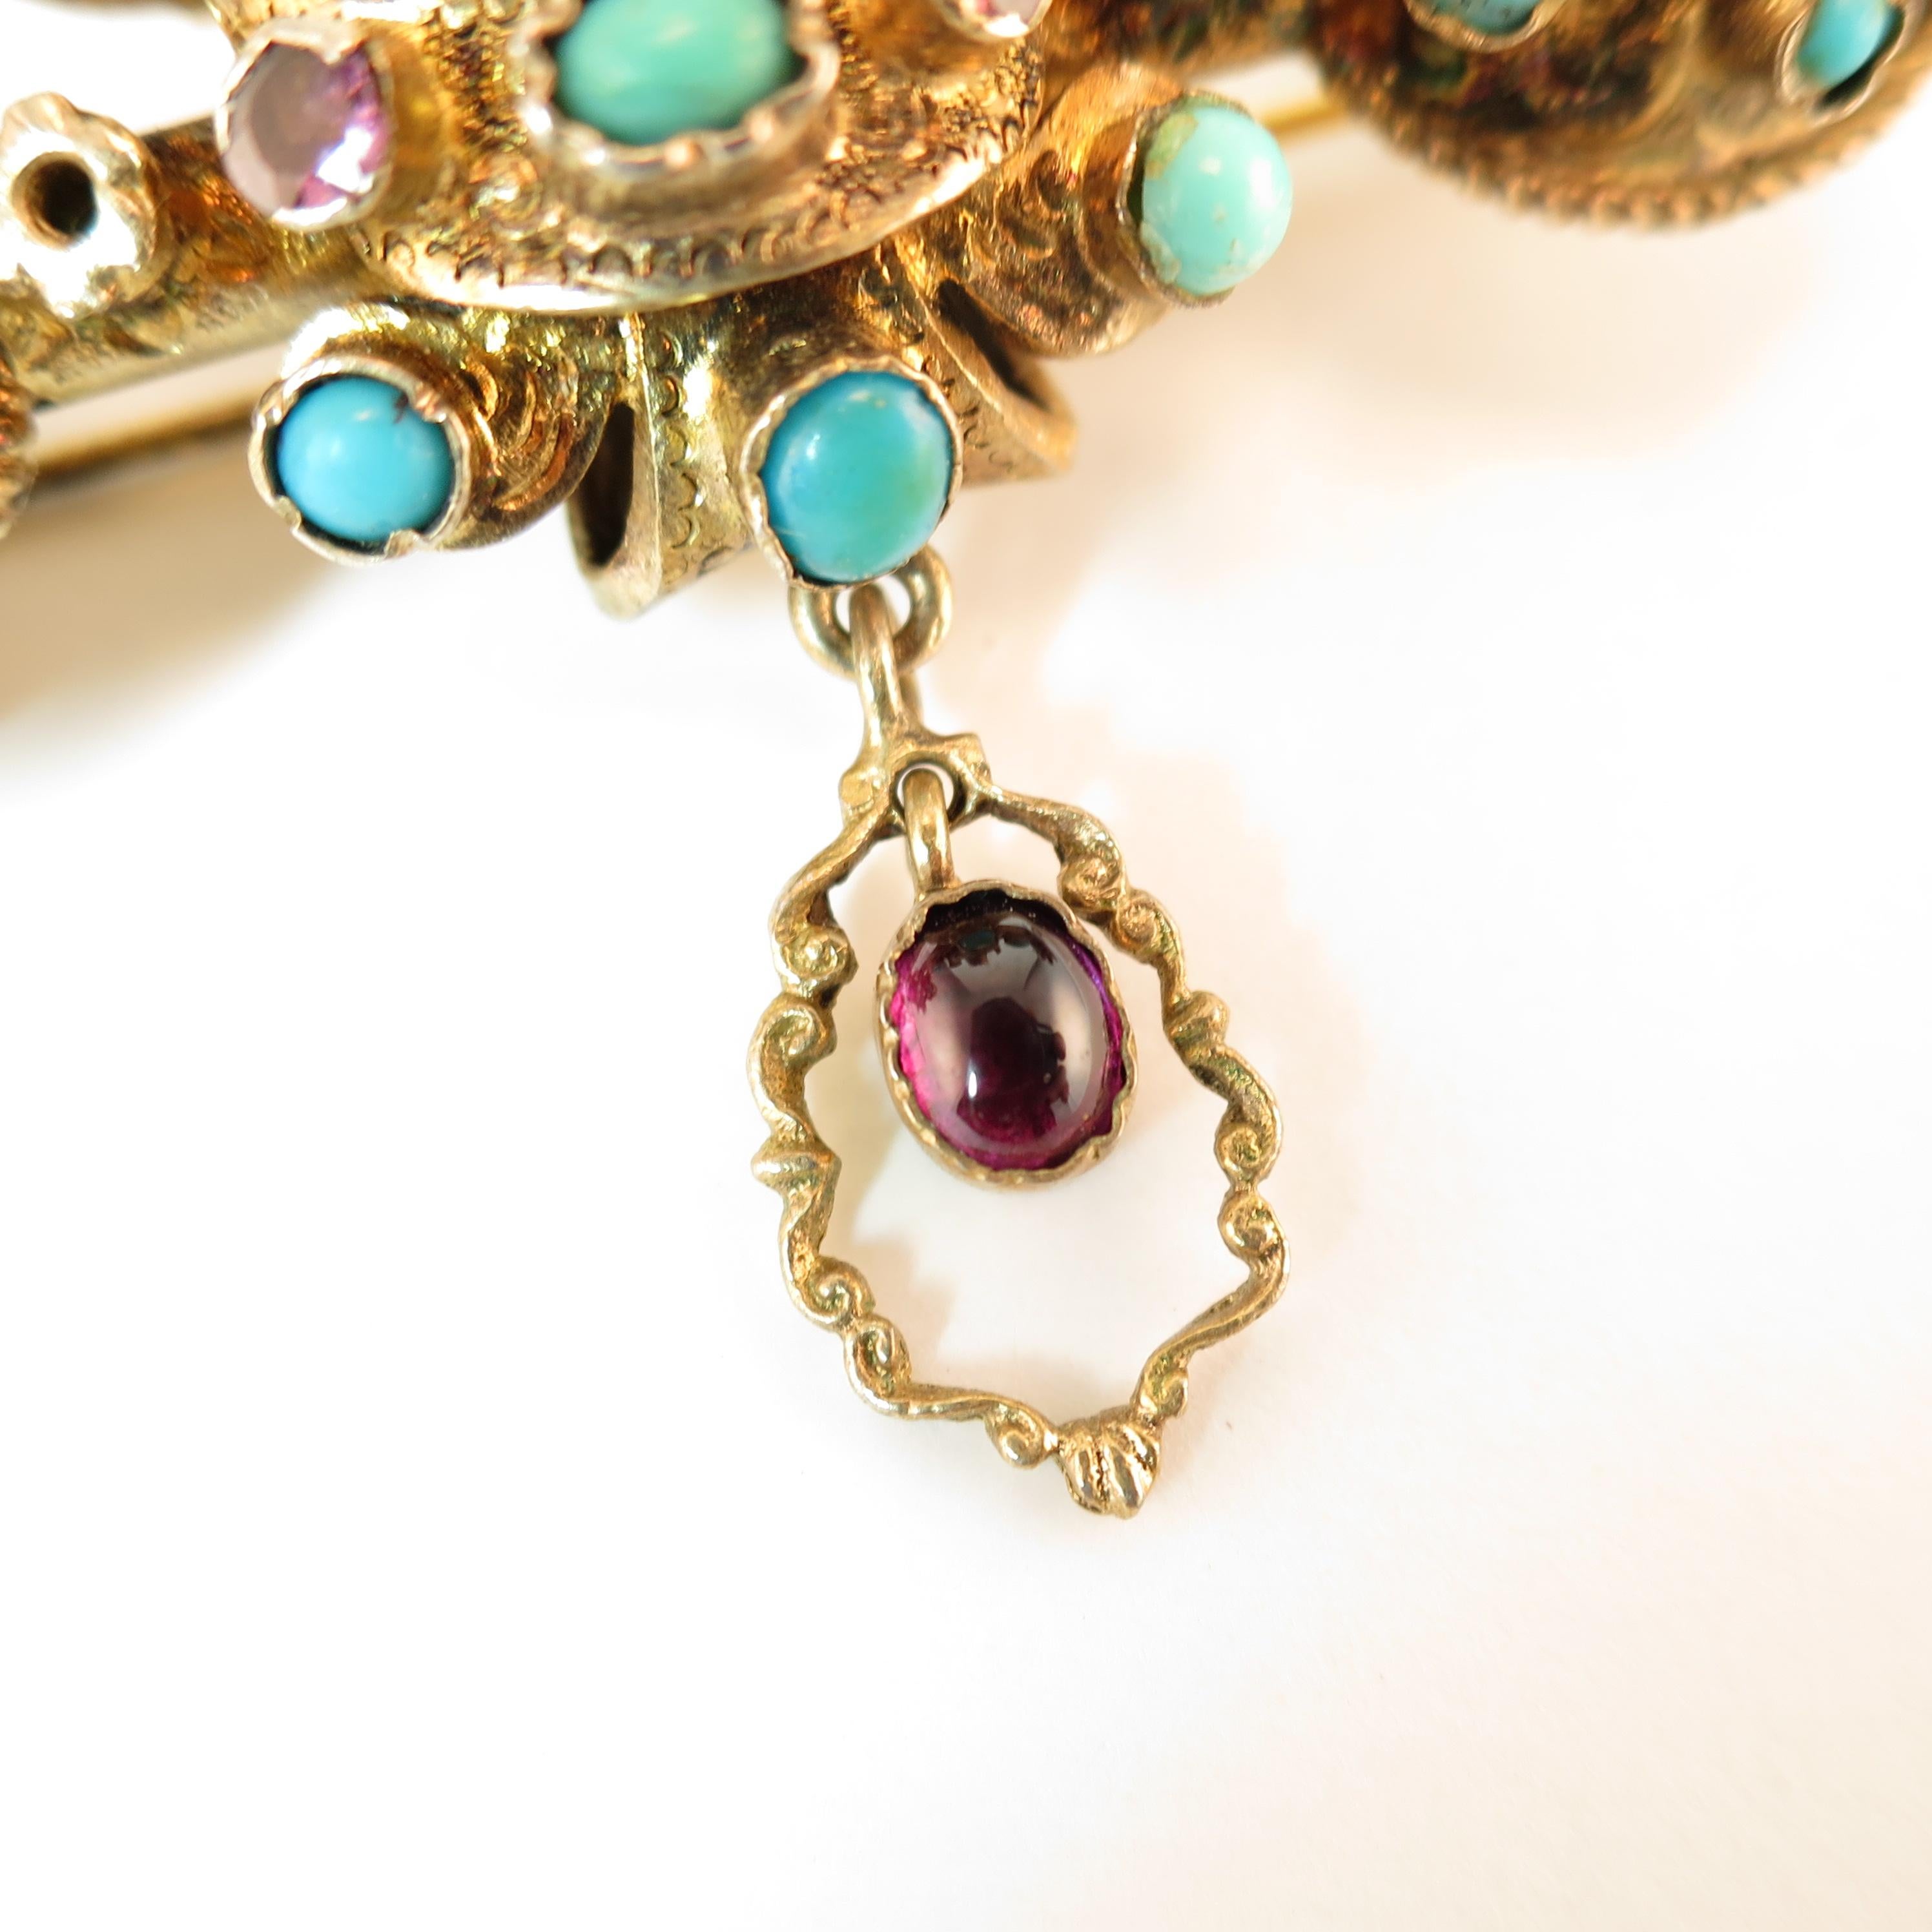 Georgian Baroque Brooch 10k Gold Amethyst Turquoise Pearls Circa 1840 For Sale 4